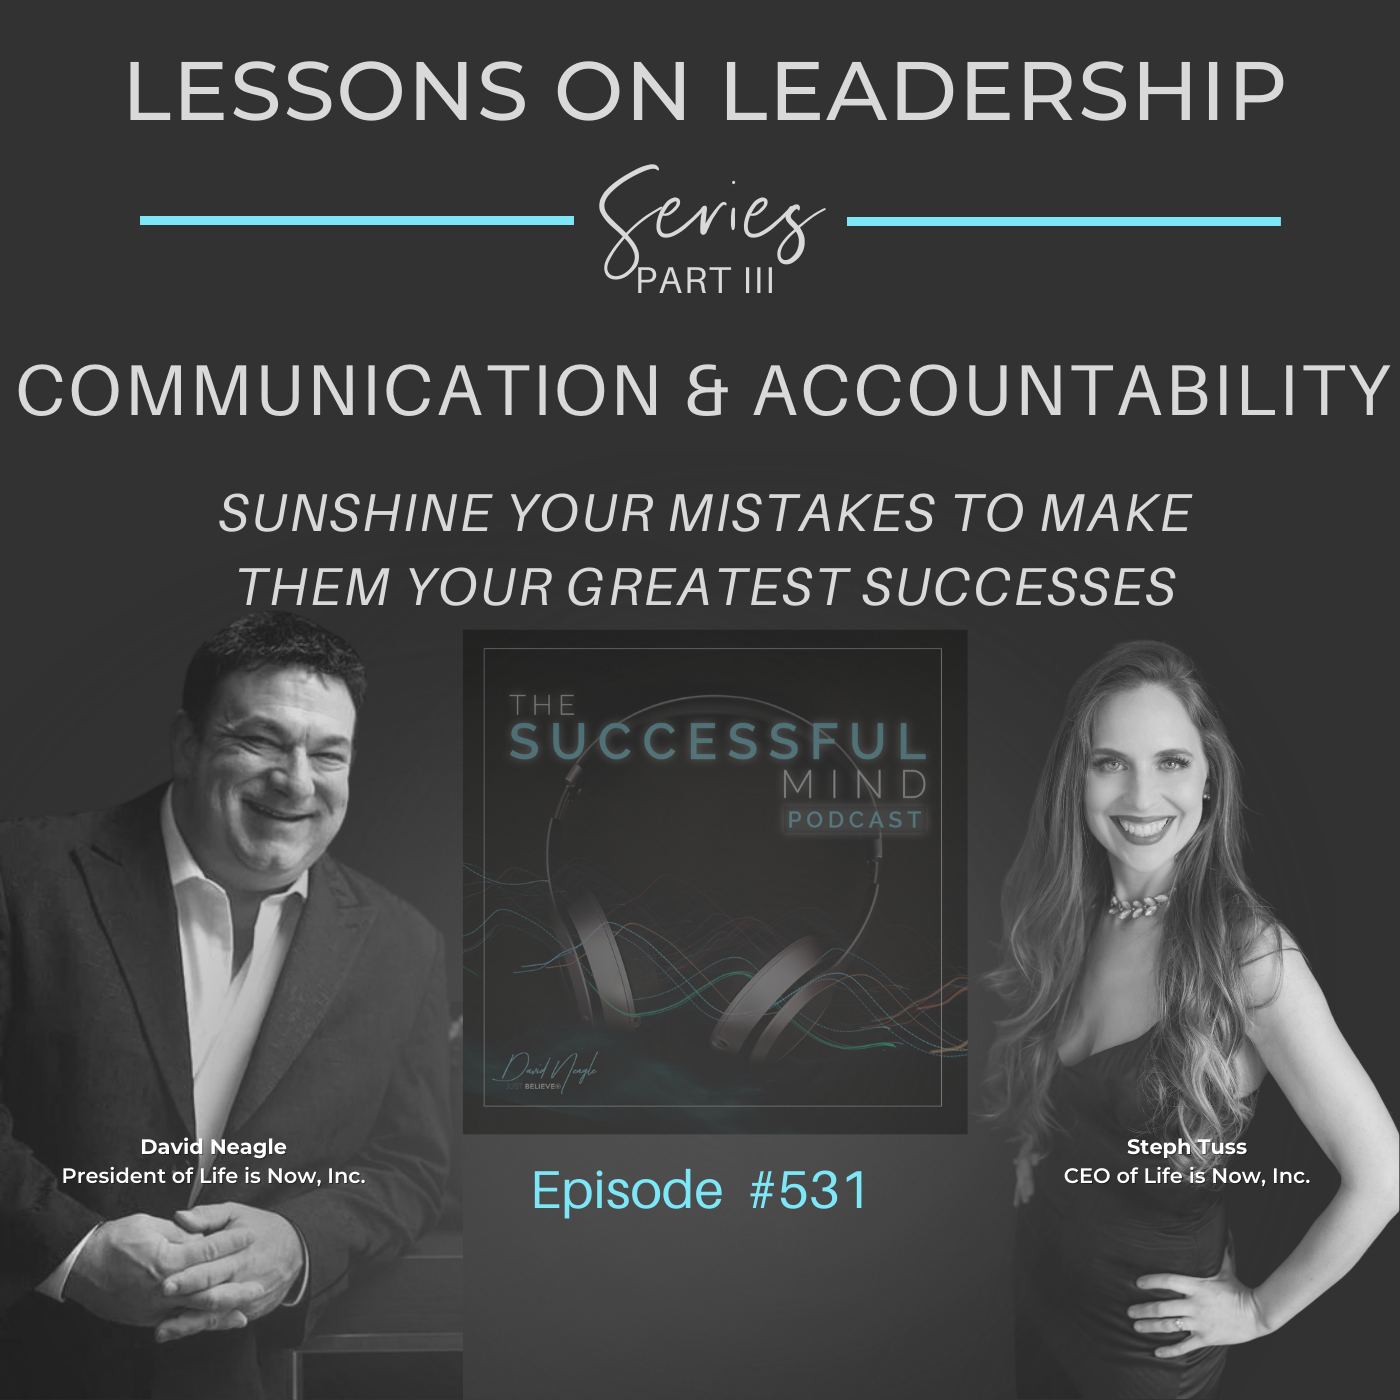 The Successful Mind Podcast – Episode 531 – Lessons on Leadership – Part III – Communication & Accountability: Sunshine Your Mistakes to Make Them Your Greatest Successes